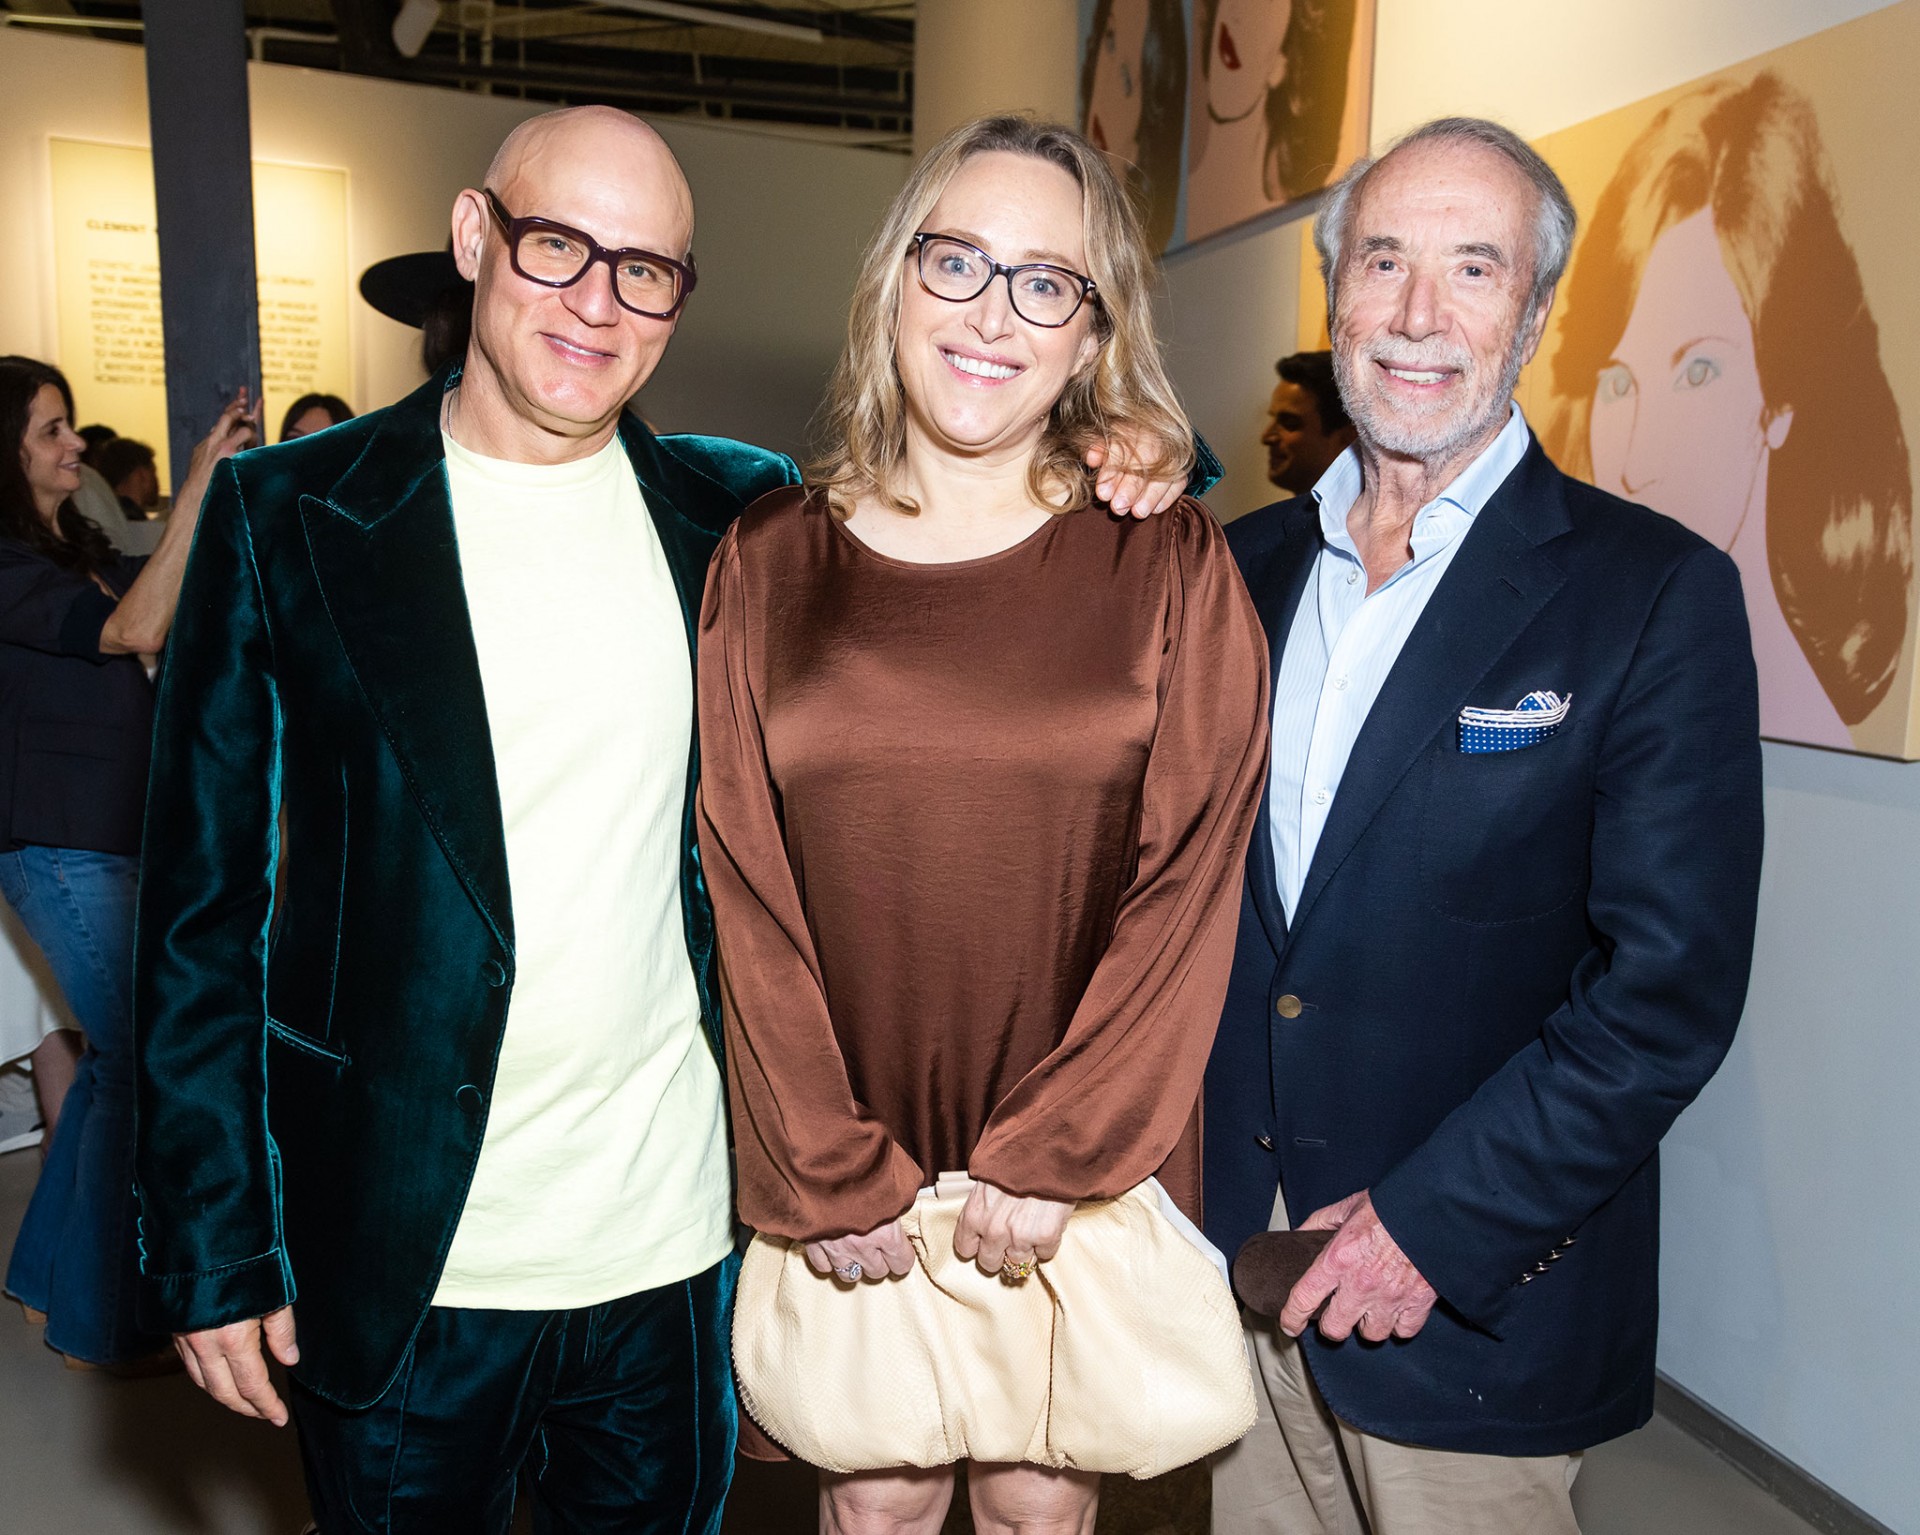 Buick Vernissage Larry Gagosian & Jeffrey Deitch: 100 Years Craig Robins Collection: Two Of The Same Kind